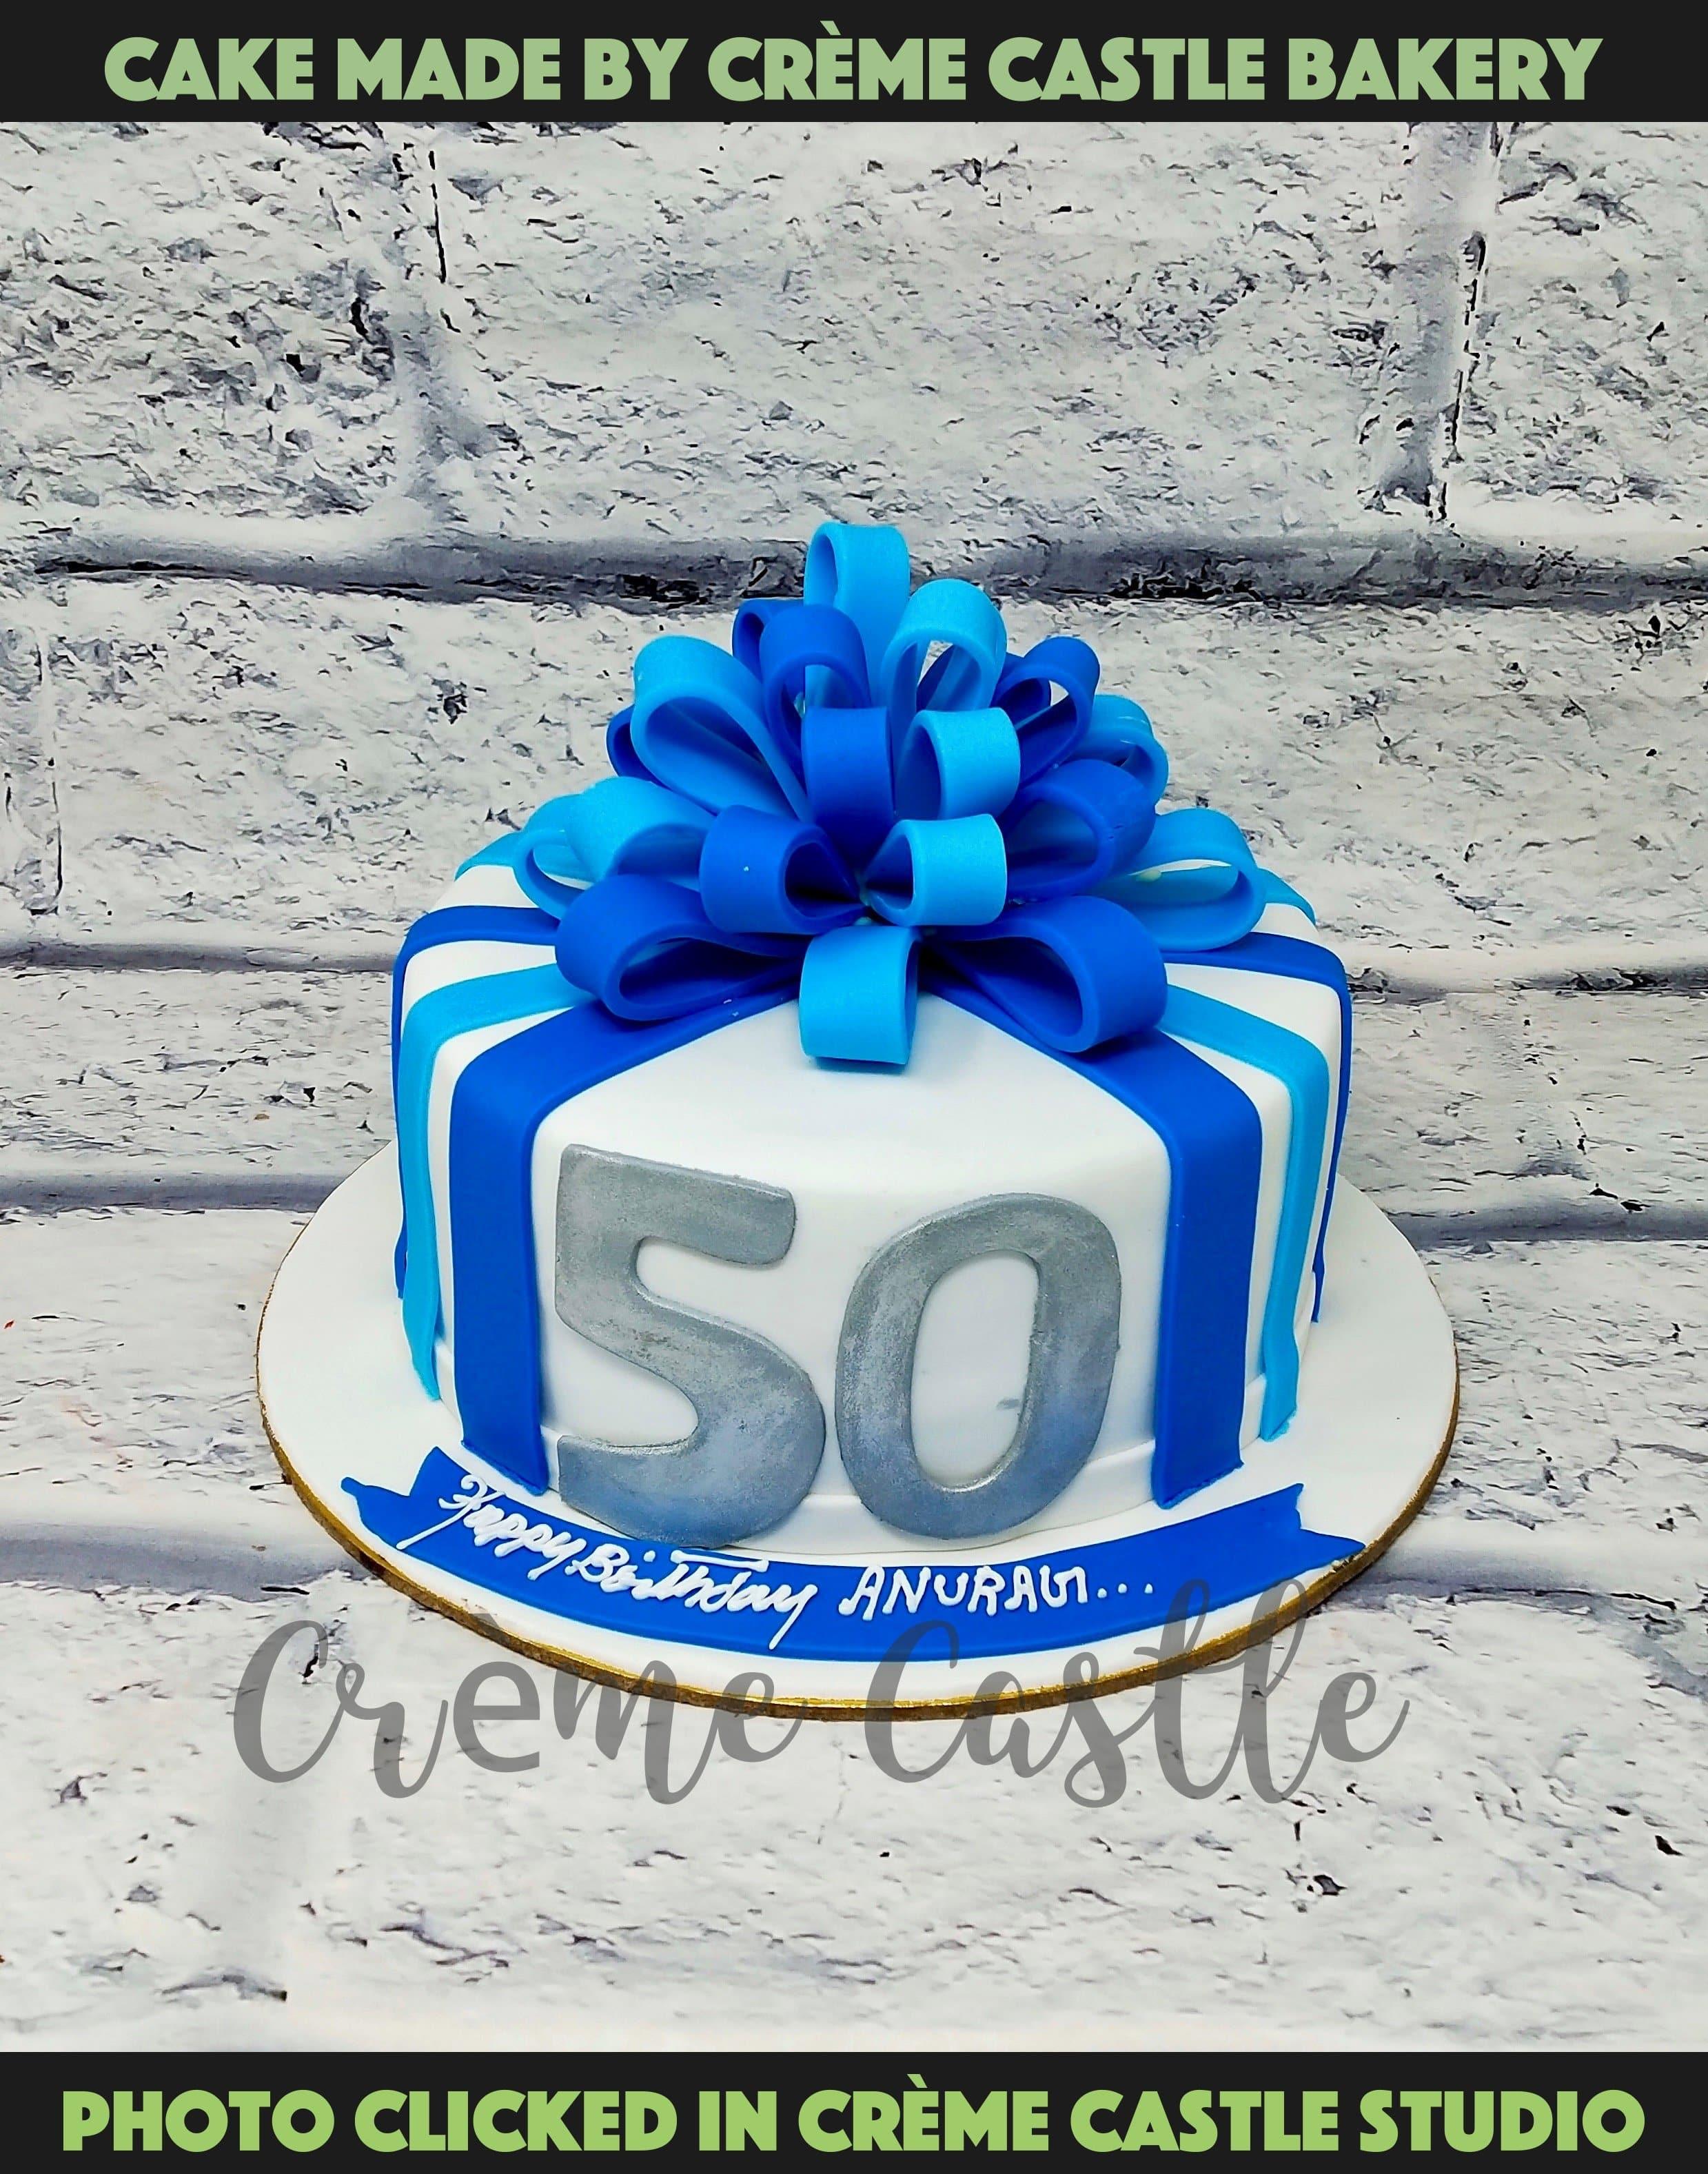 Gurgaon Special: Blue Gifts Box Fondant Cake Delivery in Gurgaon @ ₹4,499.00